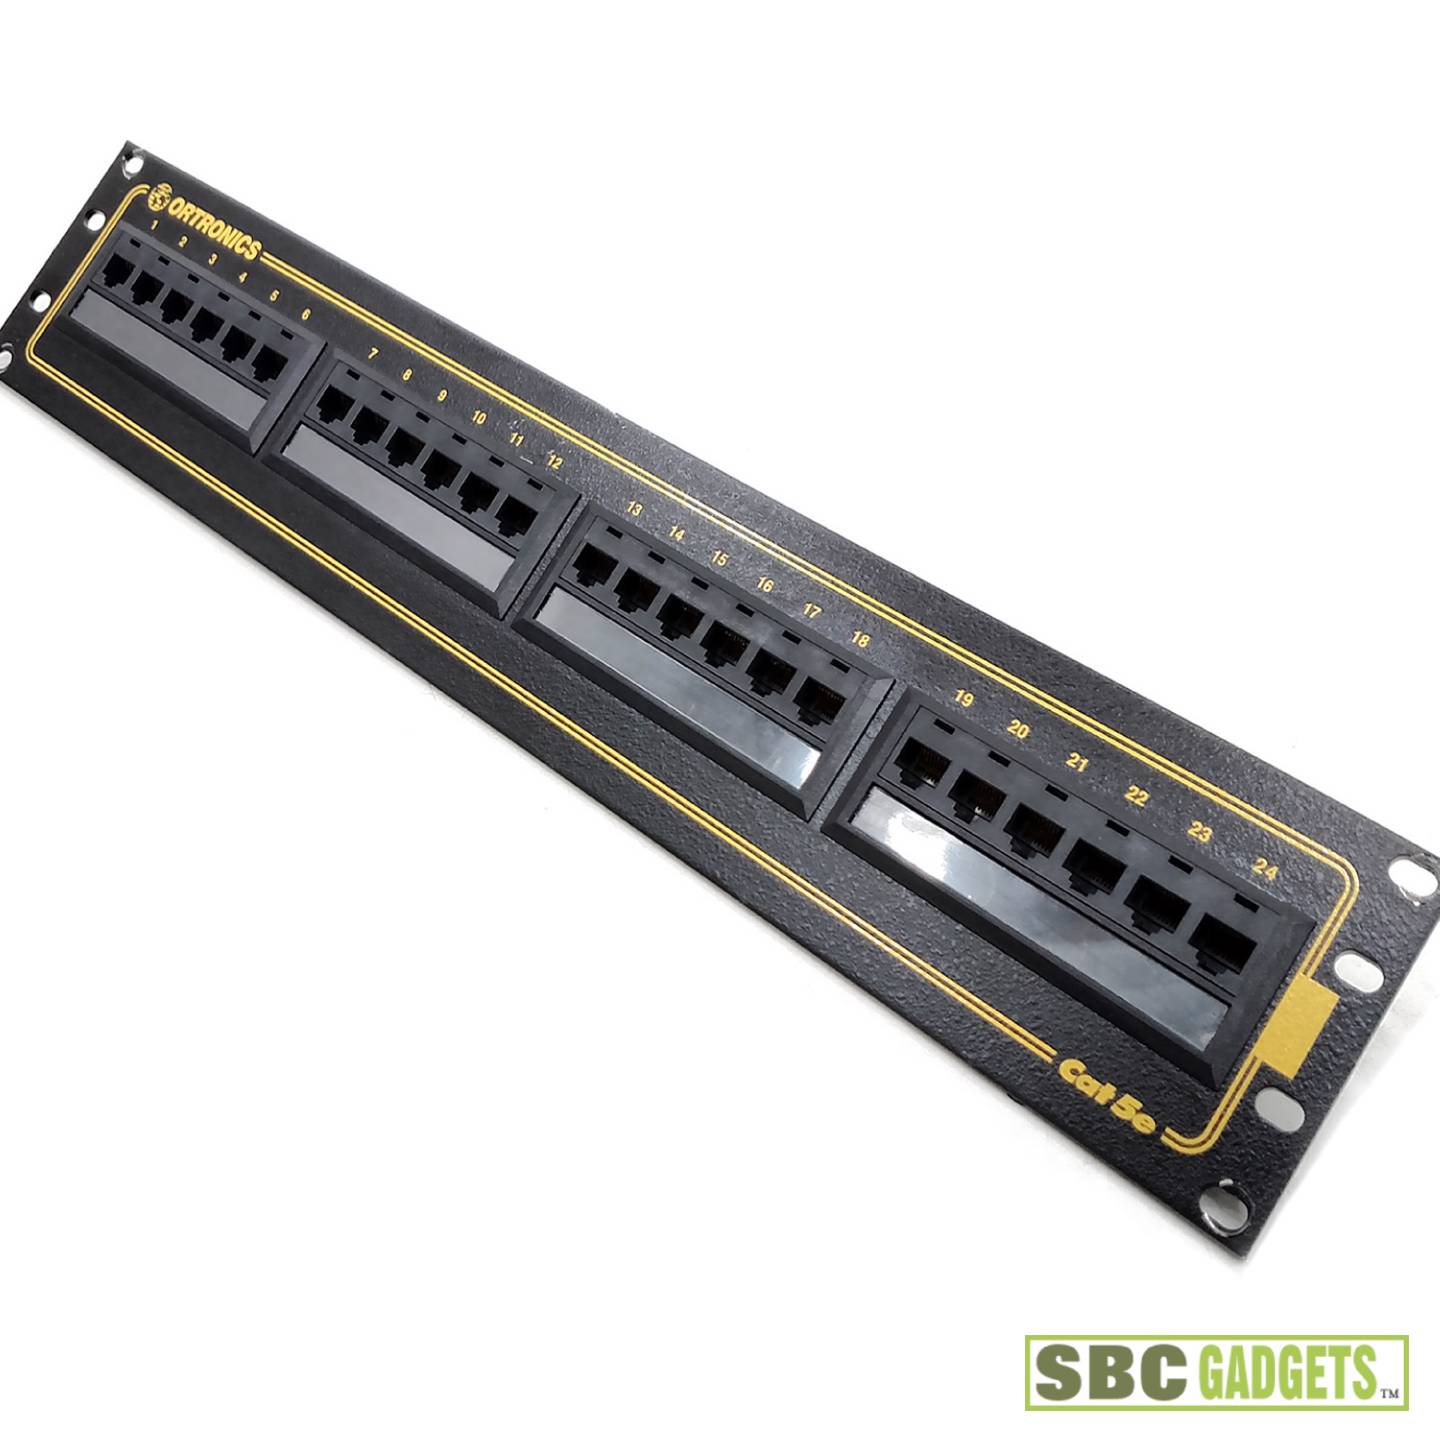 Adc Video Patch Panel Label Template